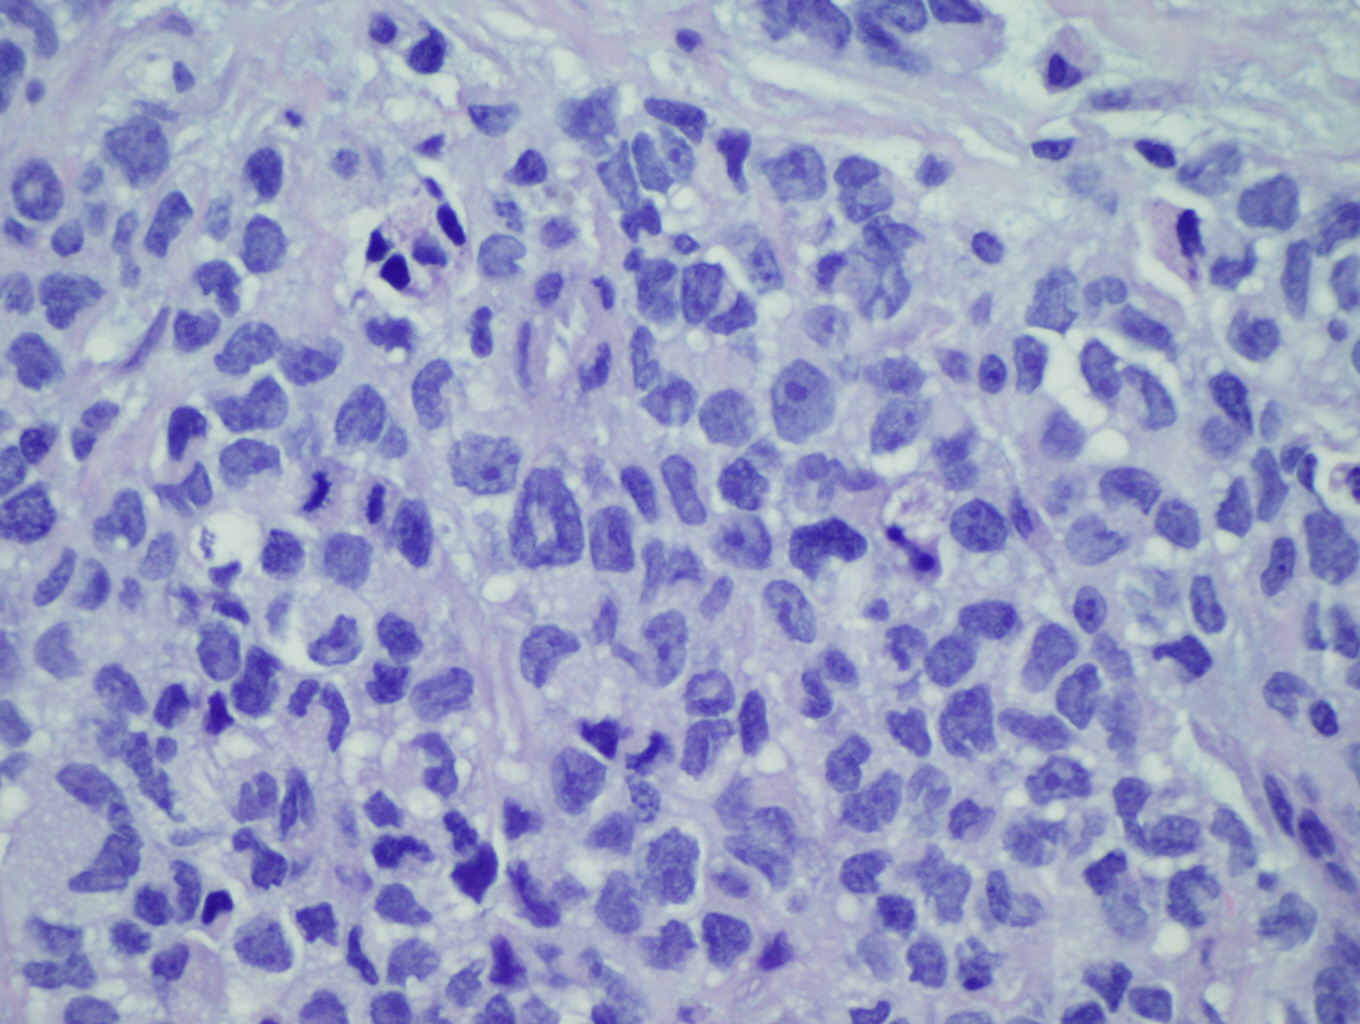 Microscopic image 2 - Biopsy from breast mass, 60x (Click to enlarge)